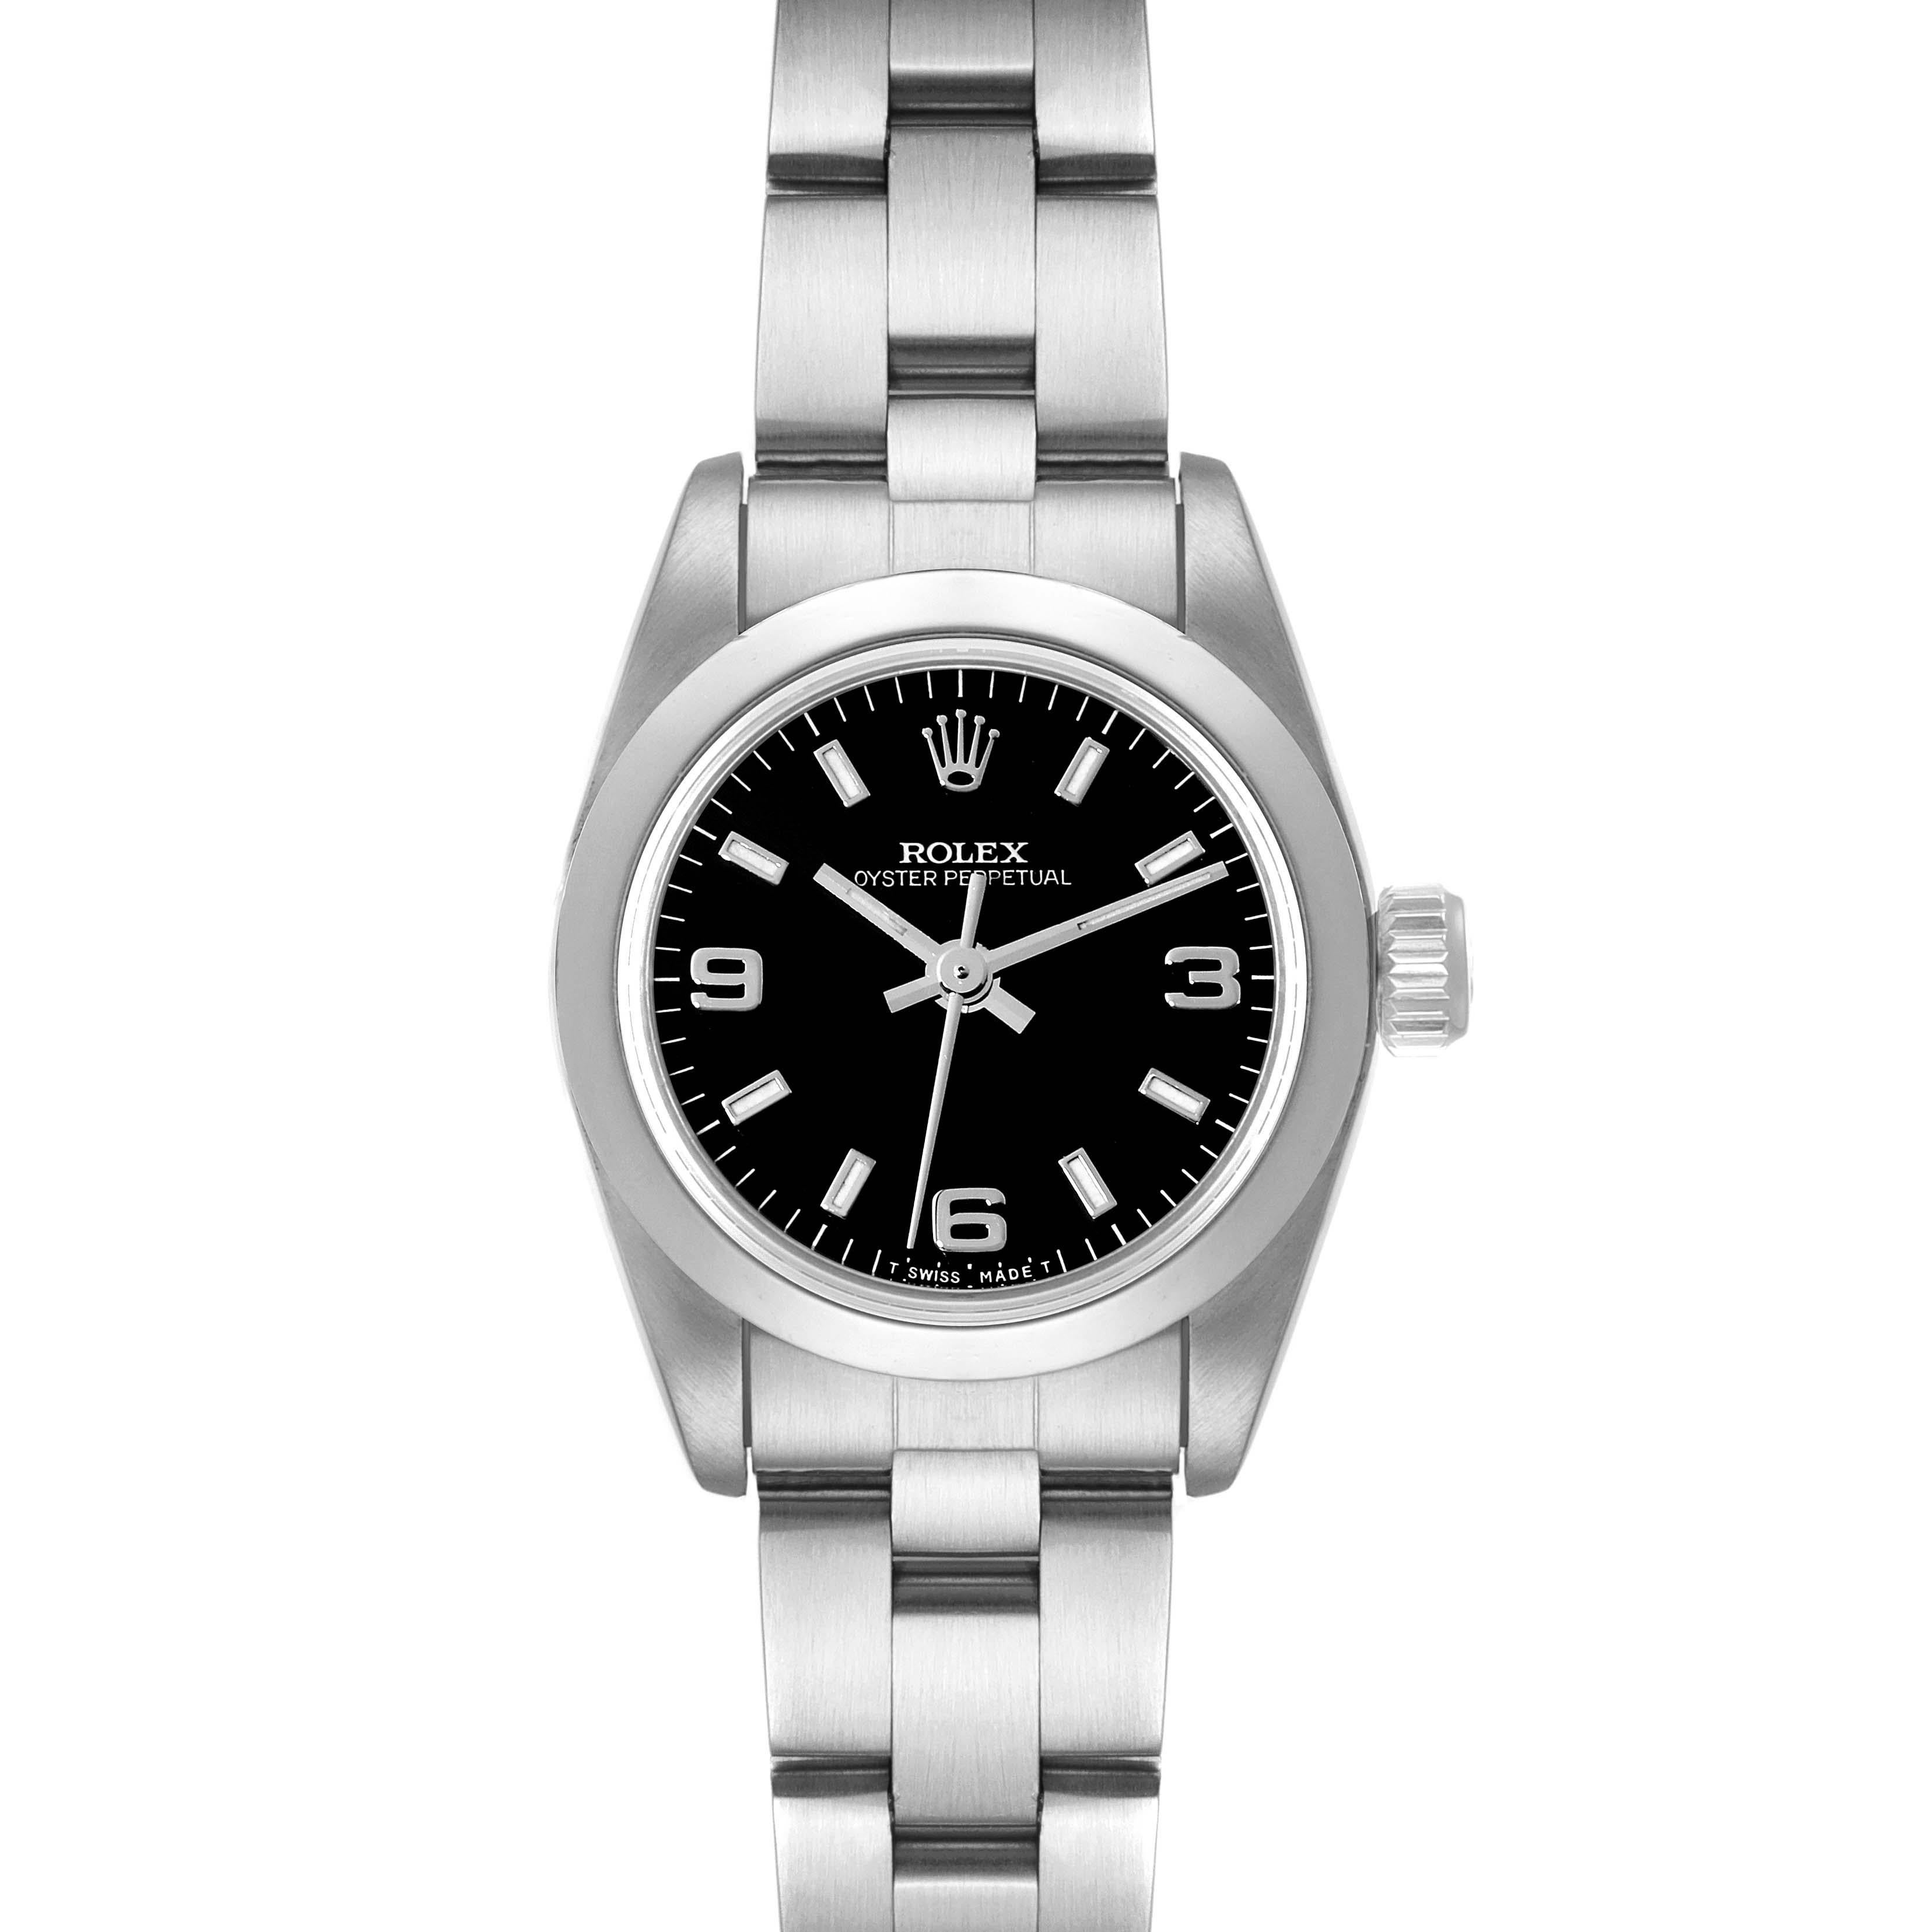 Rolex Oyster Perpetual Steel Black Dial Ladies Watch 67180 Papers. Officially certified chronometer automatic self-winding movement. Stainless steel oyster case 24.0 mm in diameter. Rolex logo on a crown. Stainless steel smooth domed bezel. Scratch